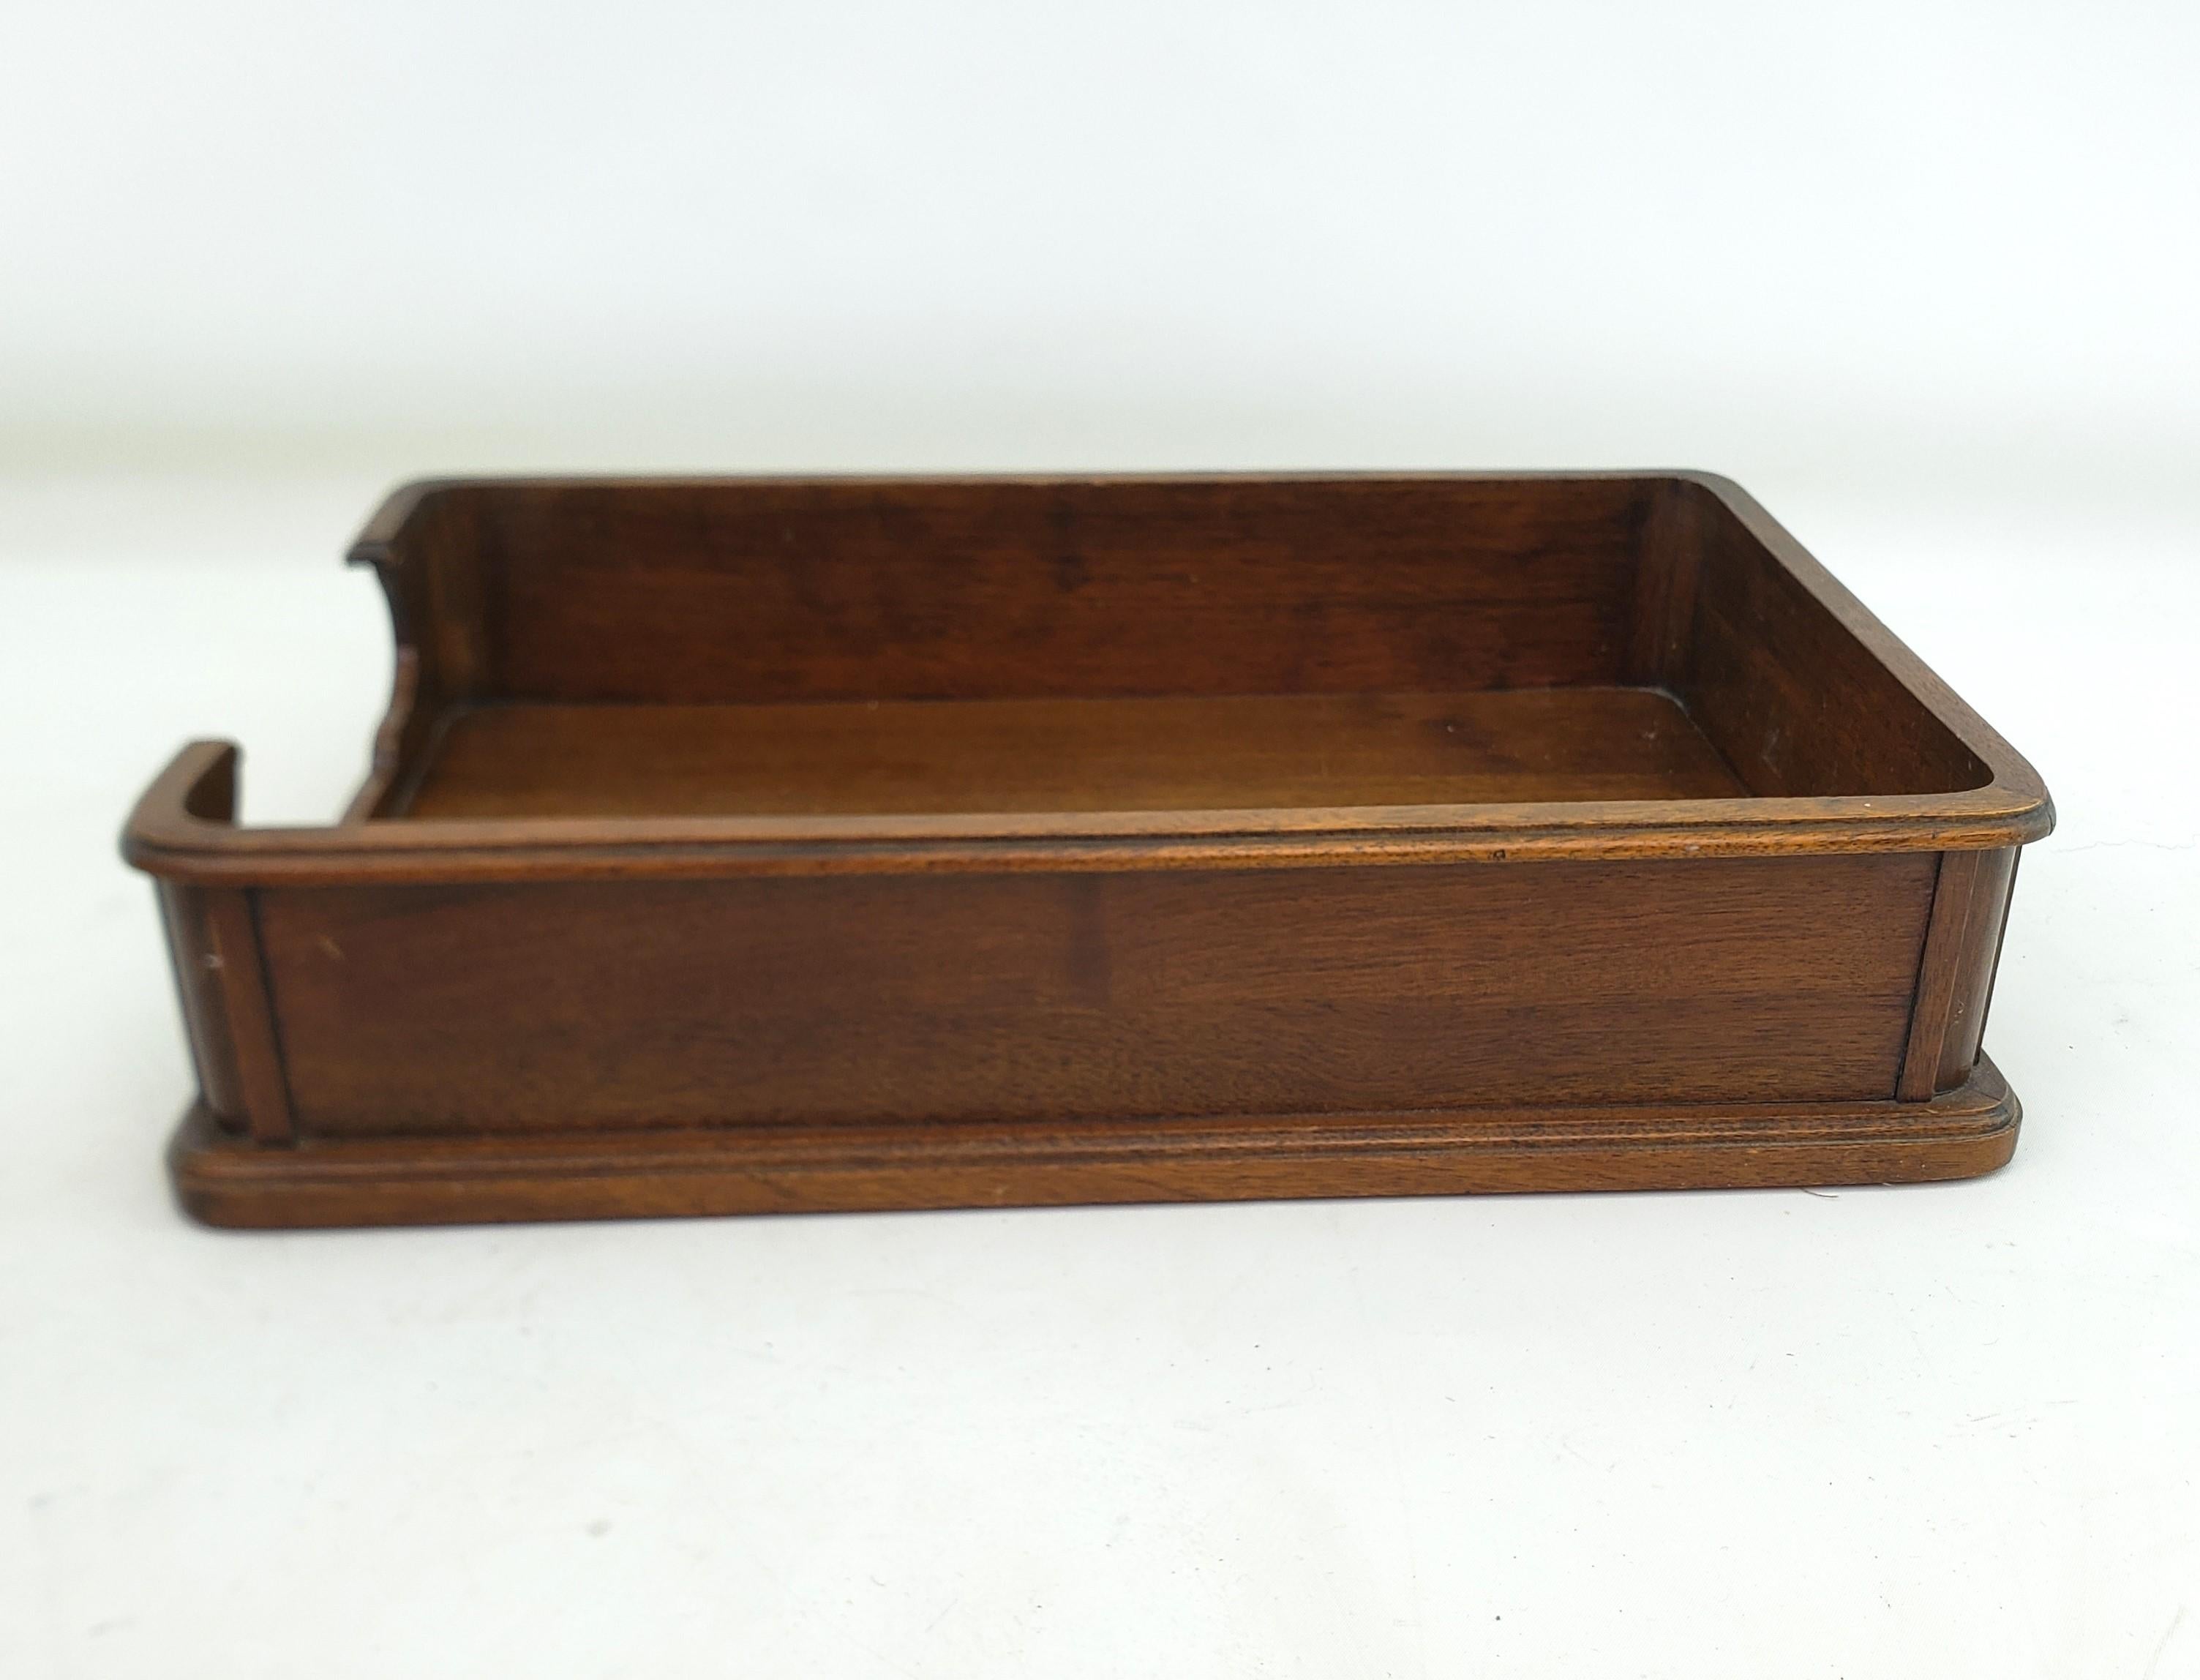 20th Century Antique Walnut Art Deco Executive Desk Tray or Document & Letter Holder For Sale